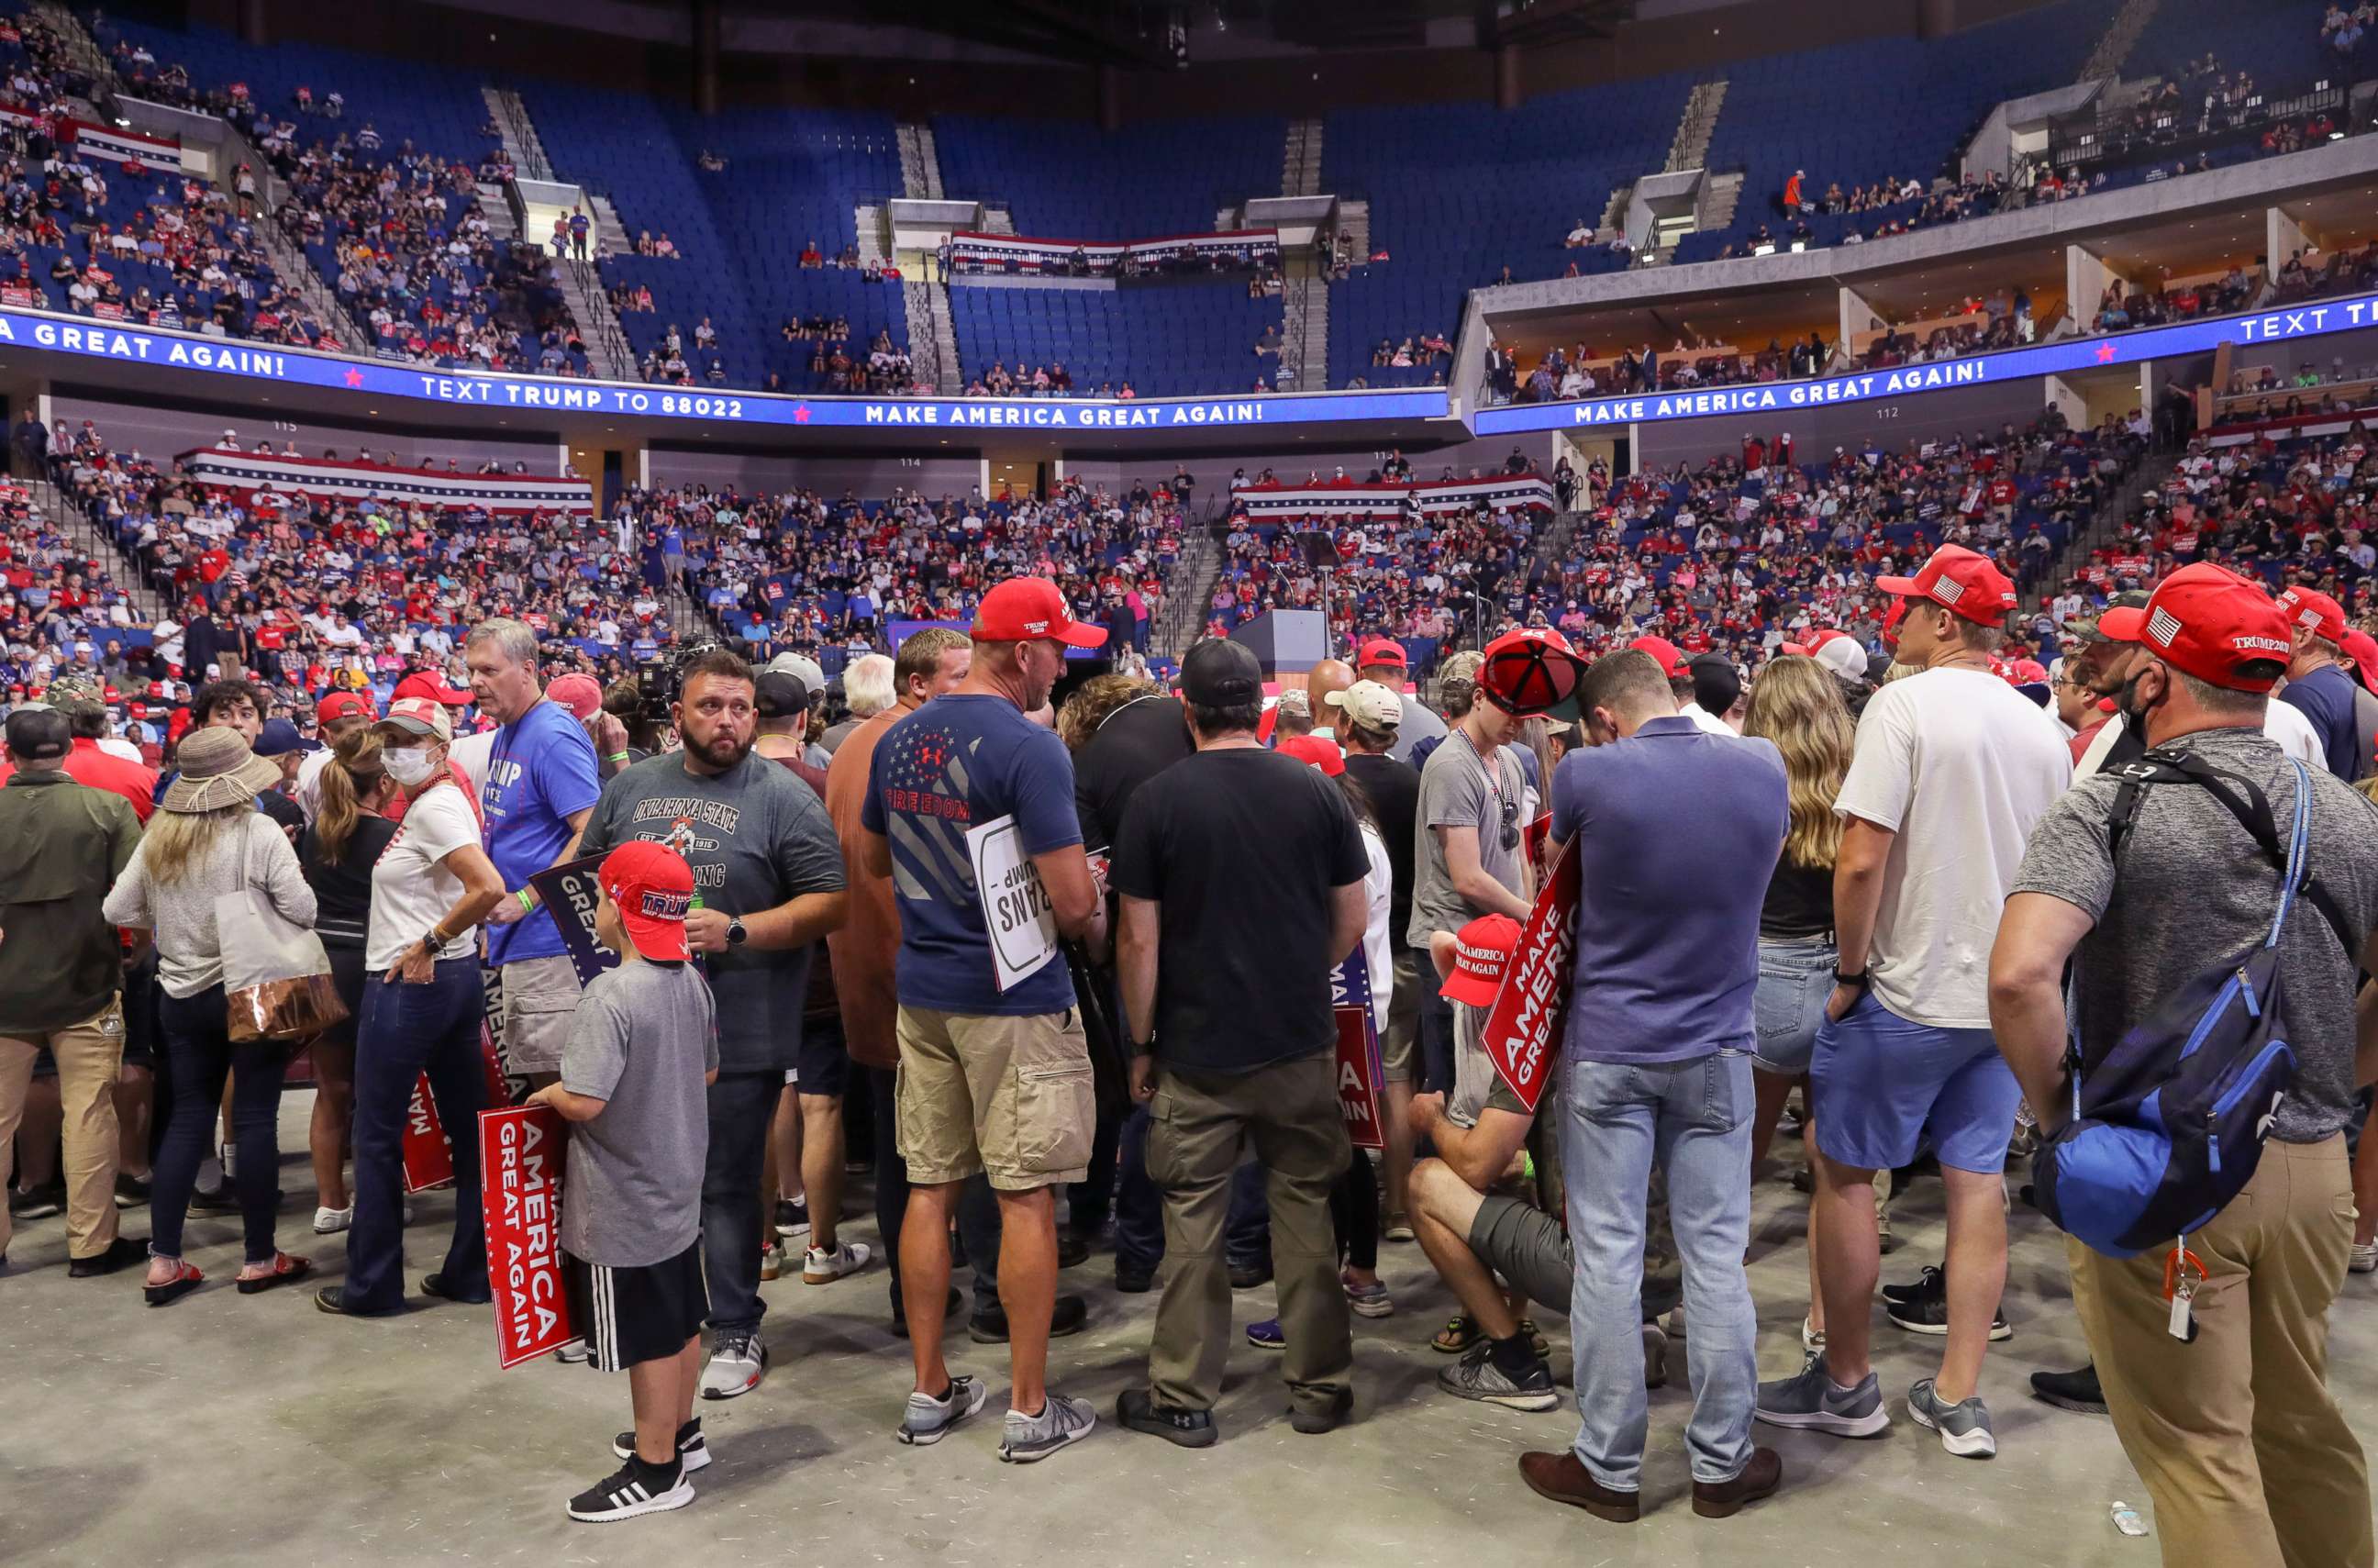 PHOTO: Supporters of U.S. President Donald Trump wait for him to appear onstage 27 minutes before the scheduled start of his speech, at his first re-election campaign rally in several months in the midst of the coronavirus disease (COVID-19) outbreak.